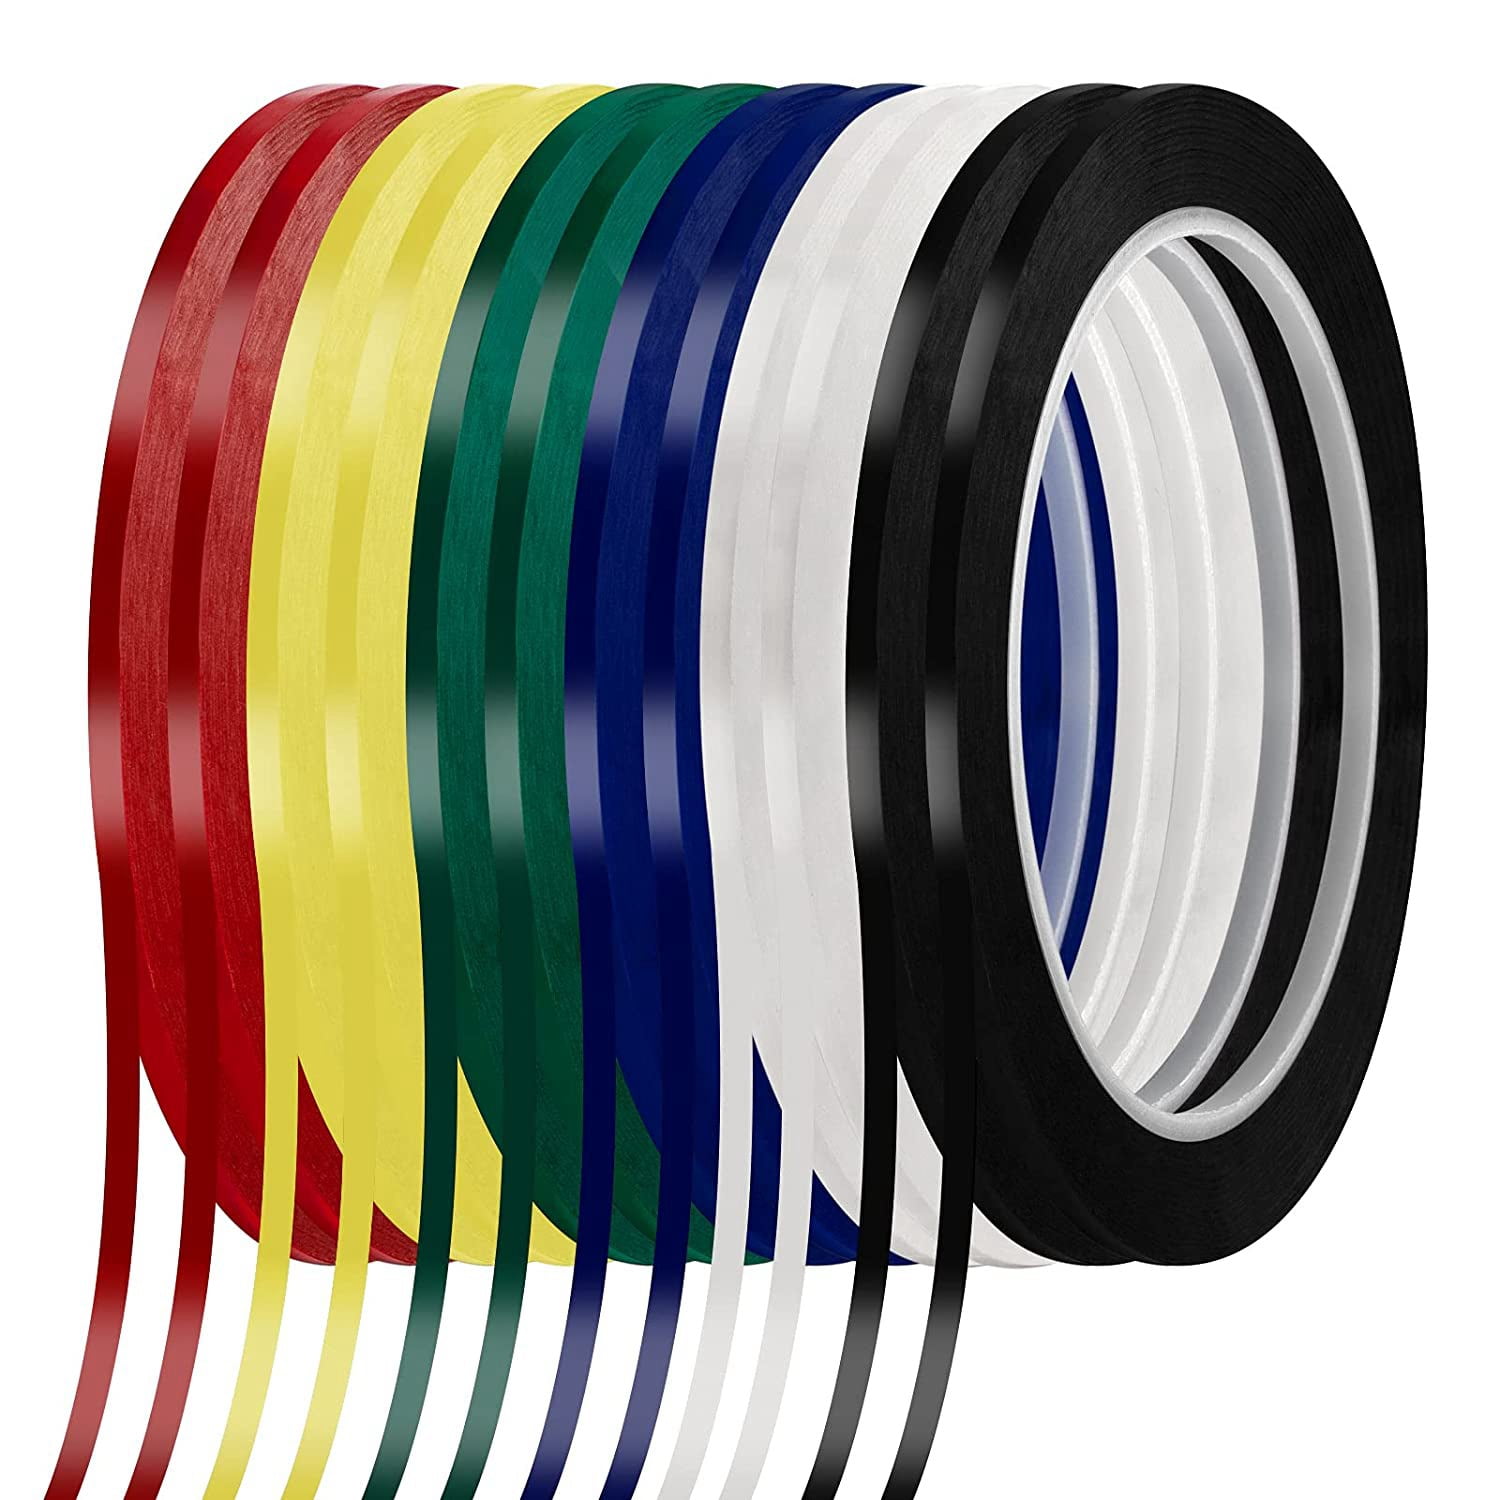 Thin Whiteboard Tape 1/8 (3mm) - 11 Color Rolls with 62 feet Length -  Pinstripe Art White Board Marking Grid Chart Label Tapes for Lines, Charts